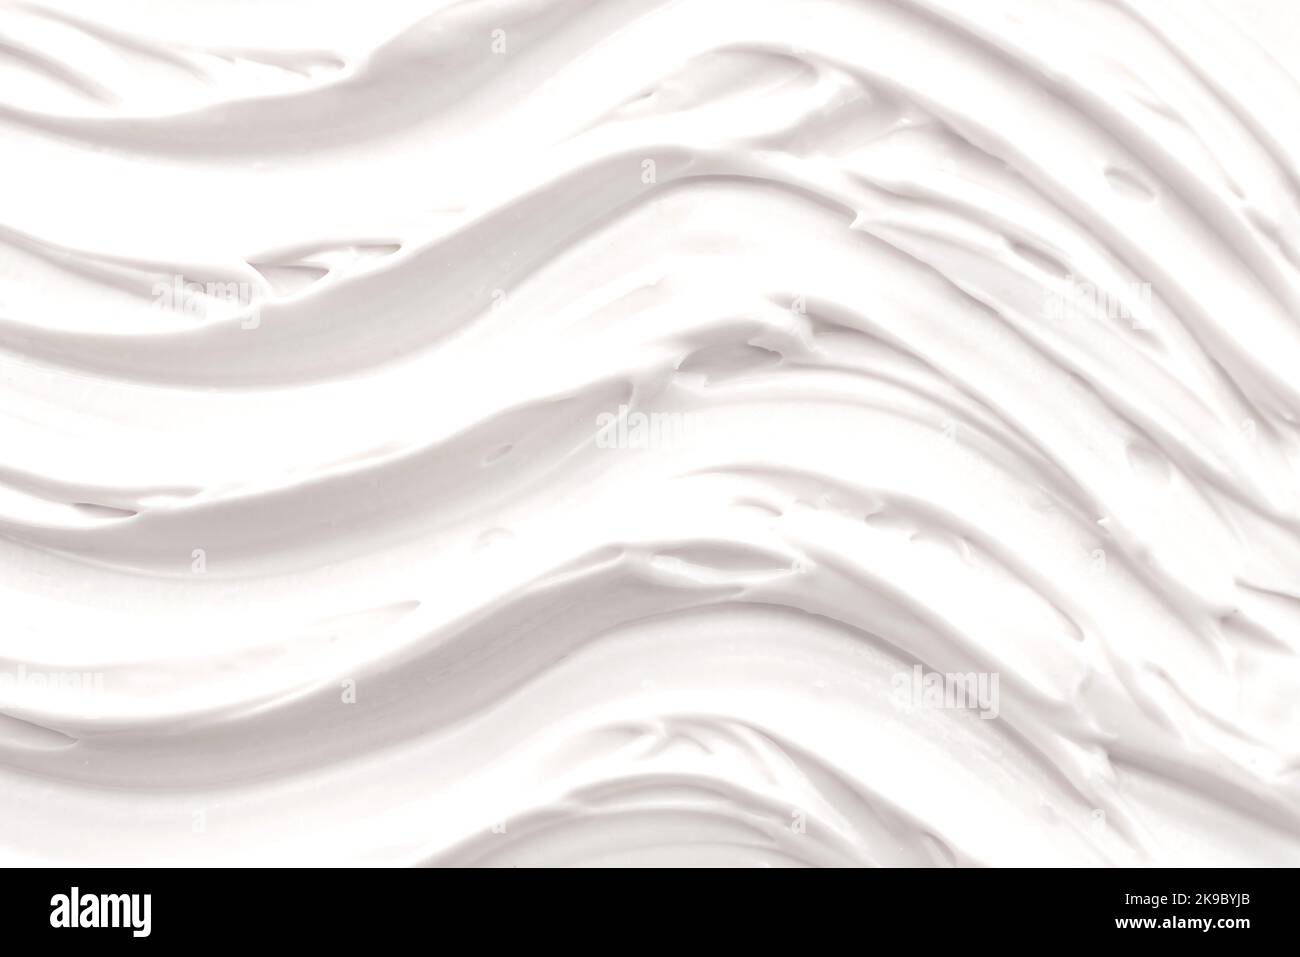 White foam texture close up background. Soapy substance with bubbles backdrop. Creamy grainy macro. Shower gel, washing liquid smears wallpaper. Cosme Stock Photo